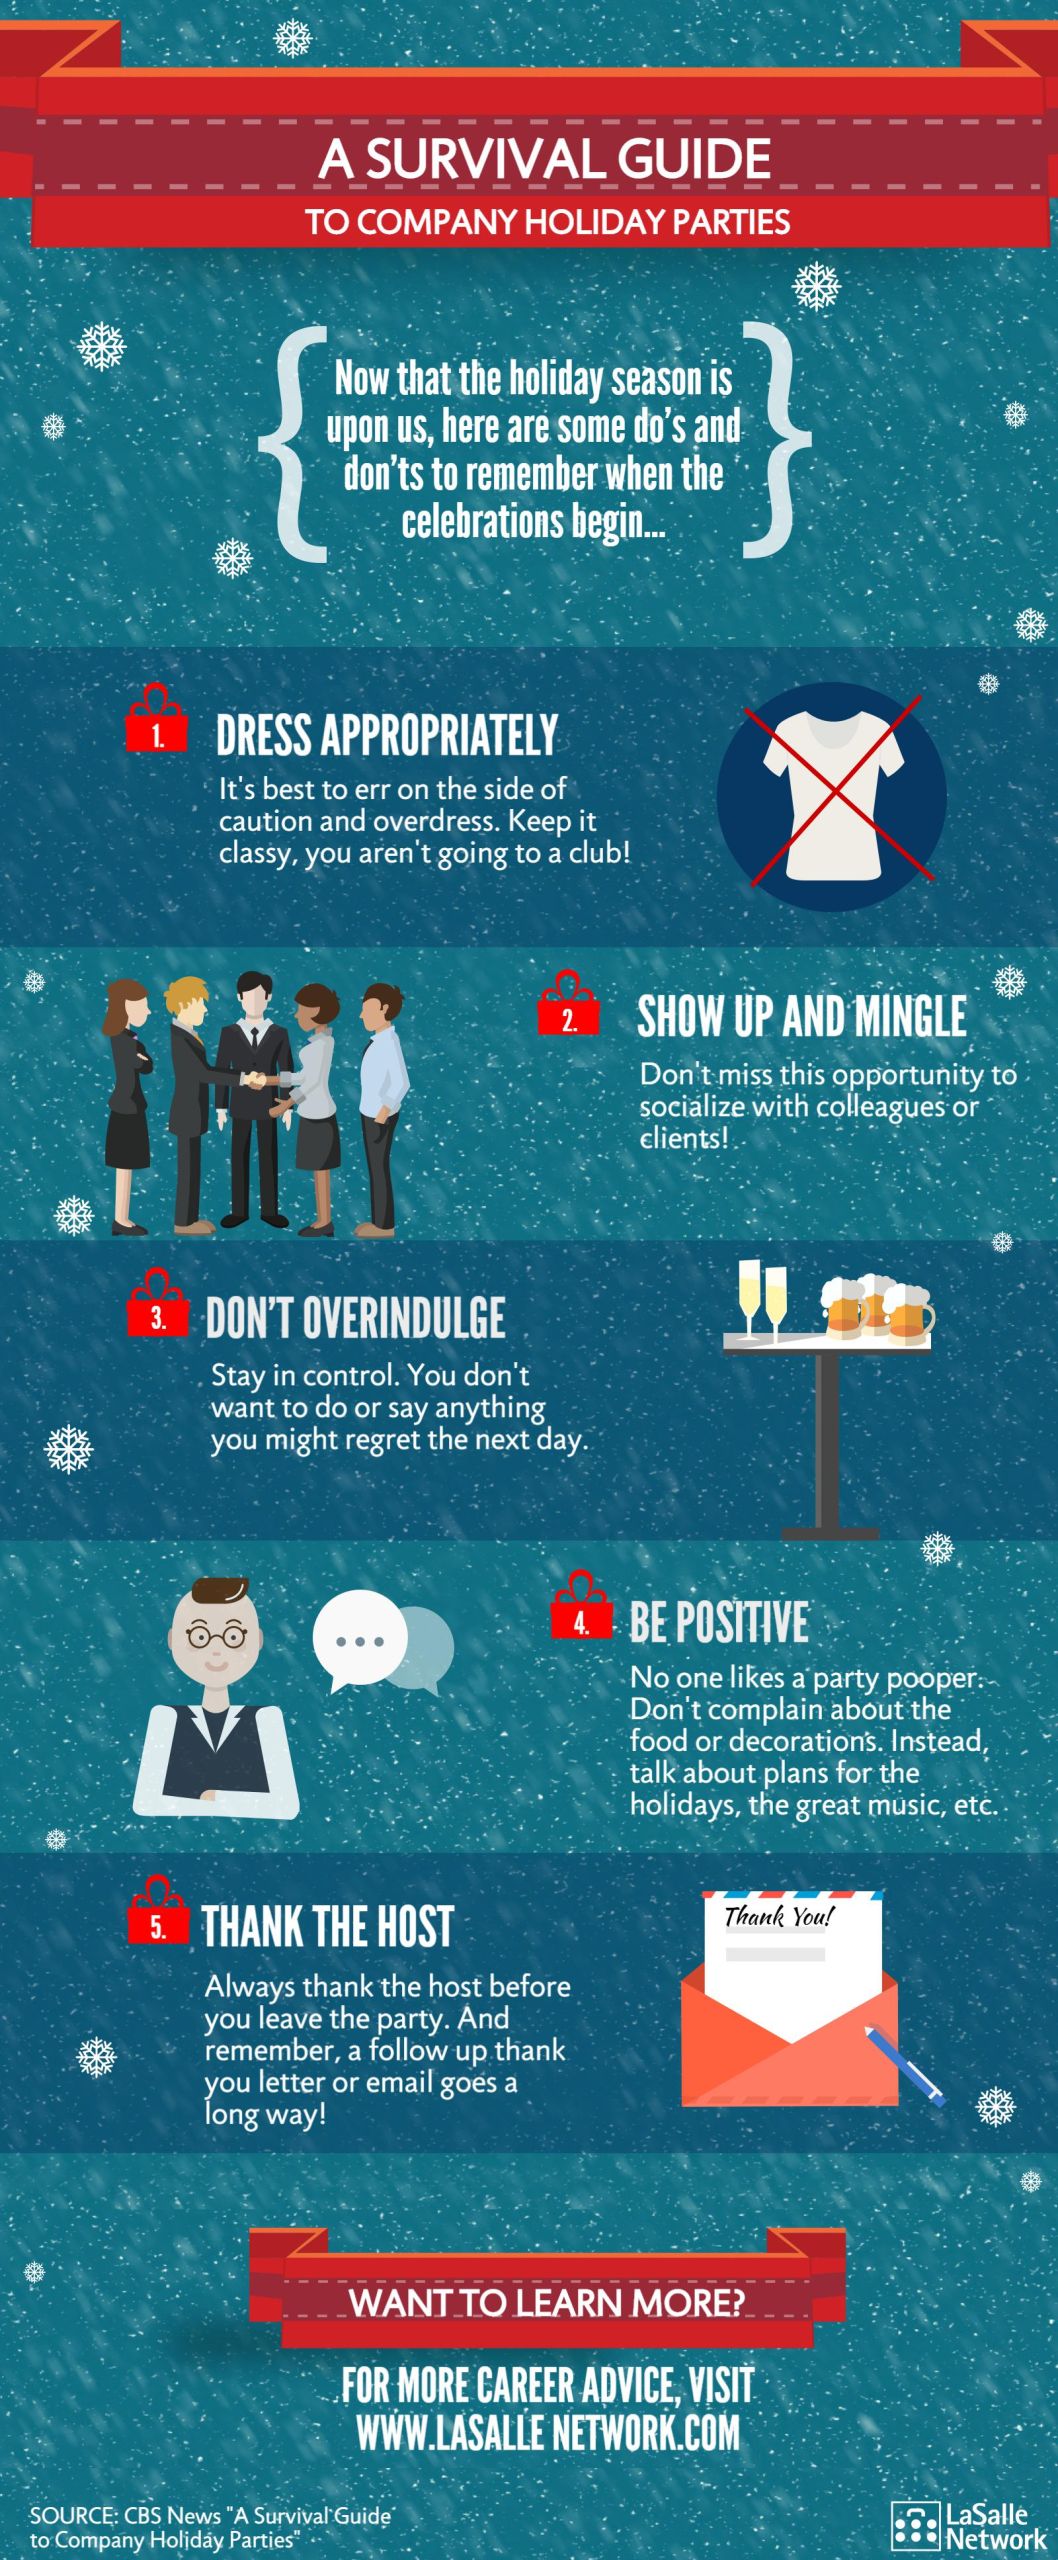 holiday party do's and don'ts infographic